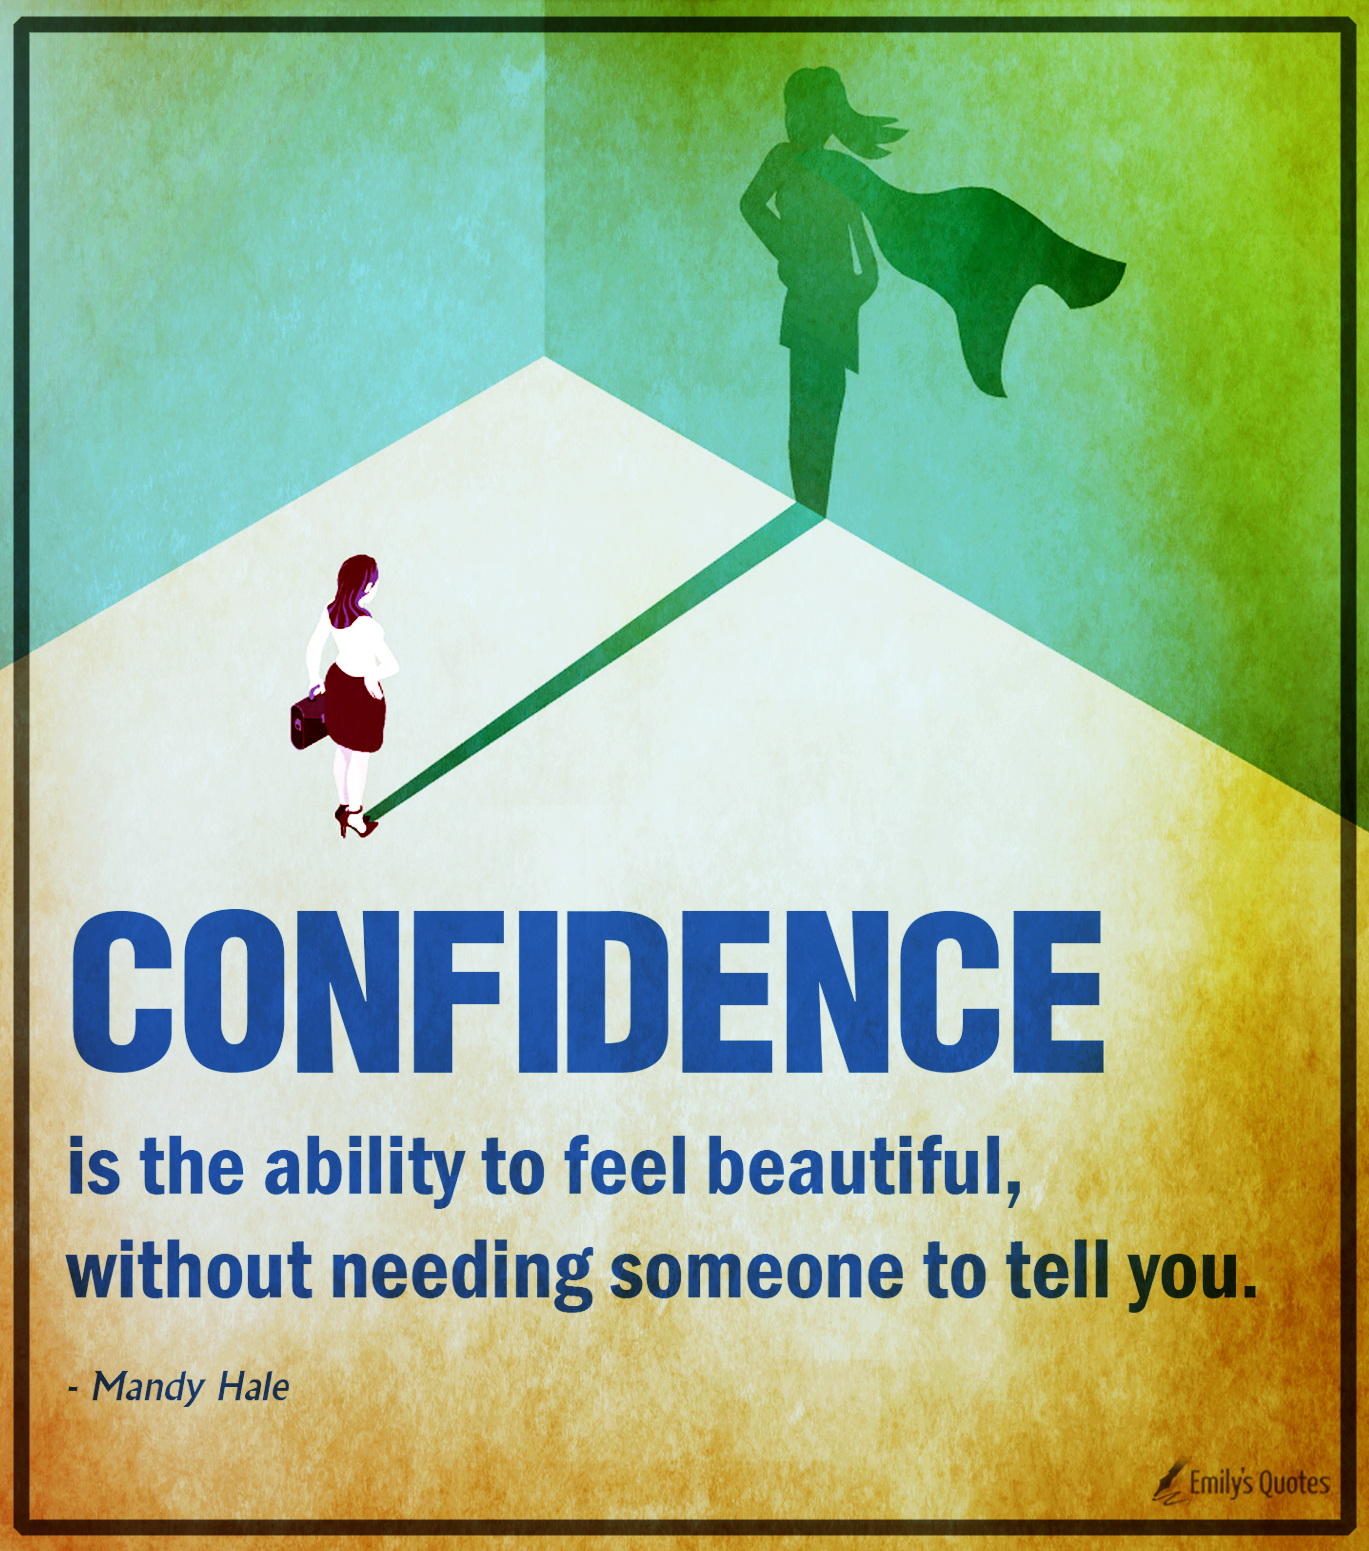 Confidence is the ability to feel beautiful, without needing someone to tell you